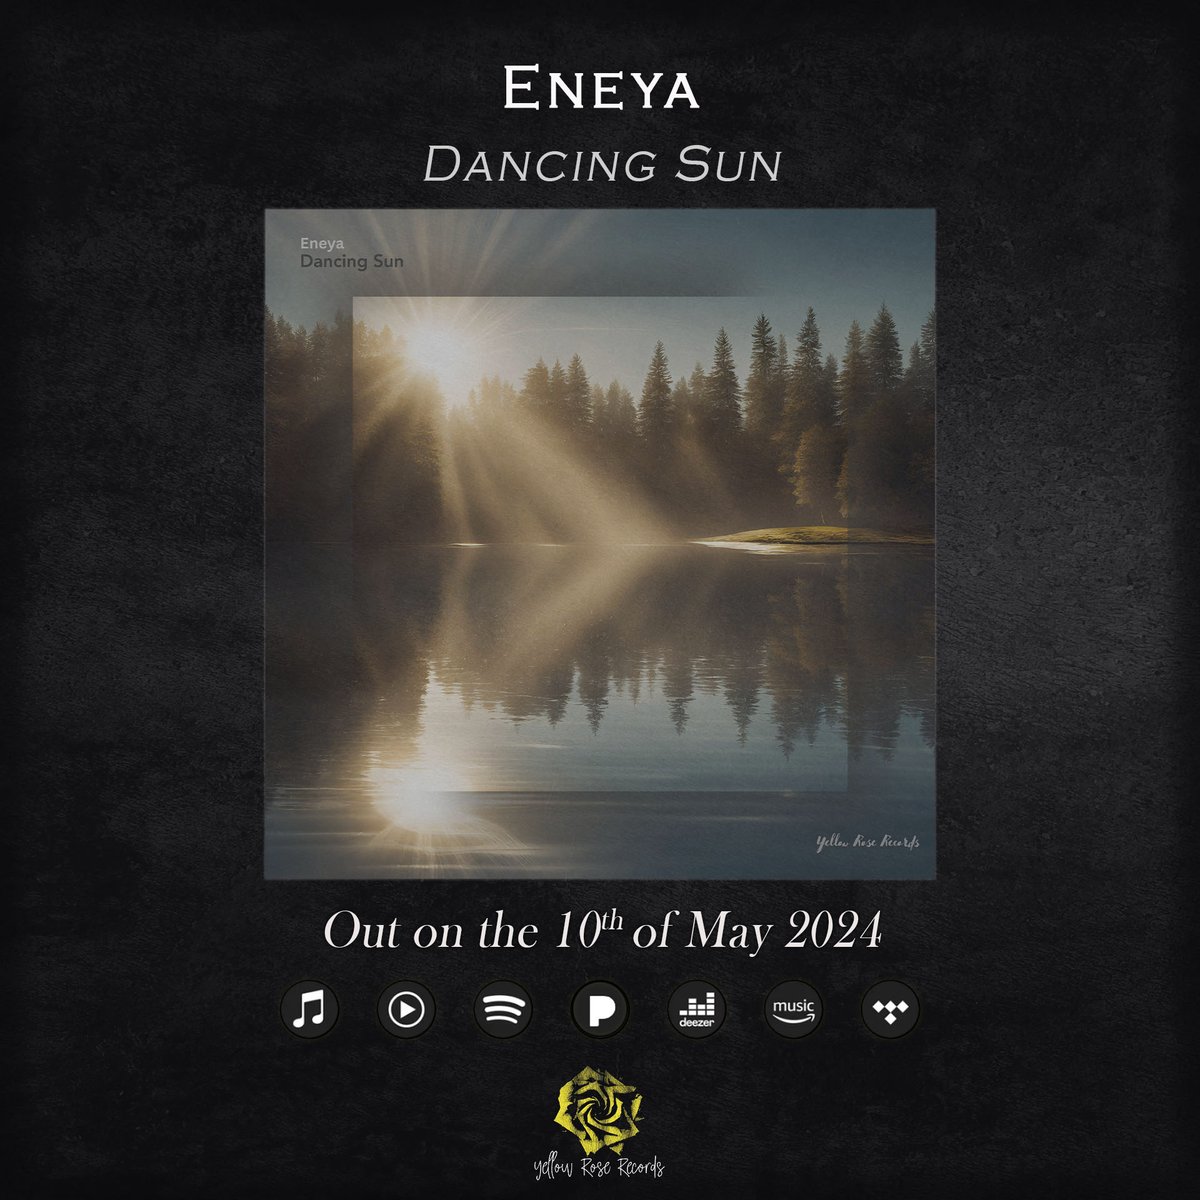 'Dancing Sun' is a modern classical composition by Eneya, a moniker of UK-based pianist and composer William Thomson. It's a journey, the feeling of being out on sunny days exploring wonderful new places.